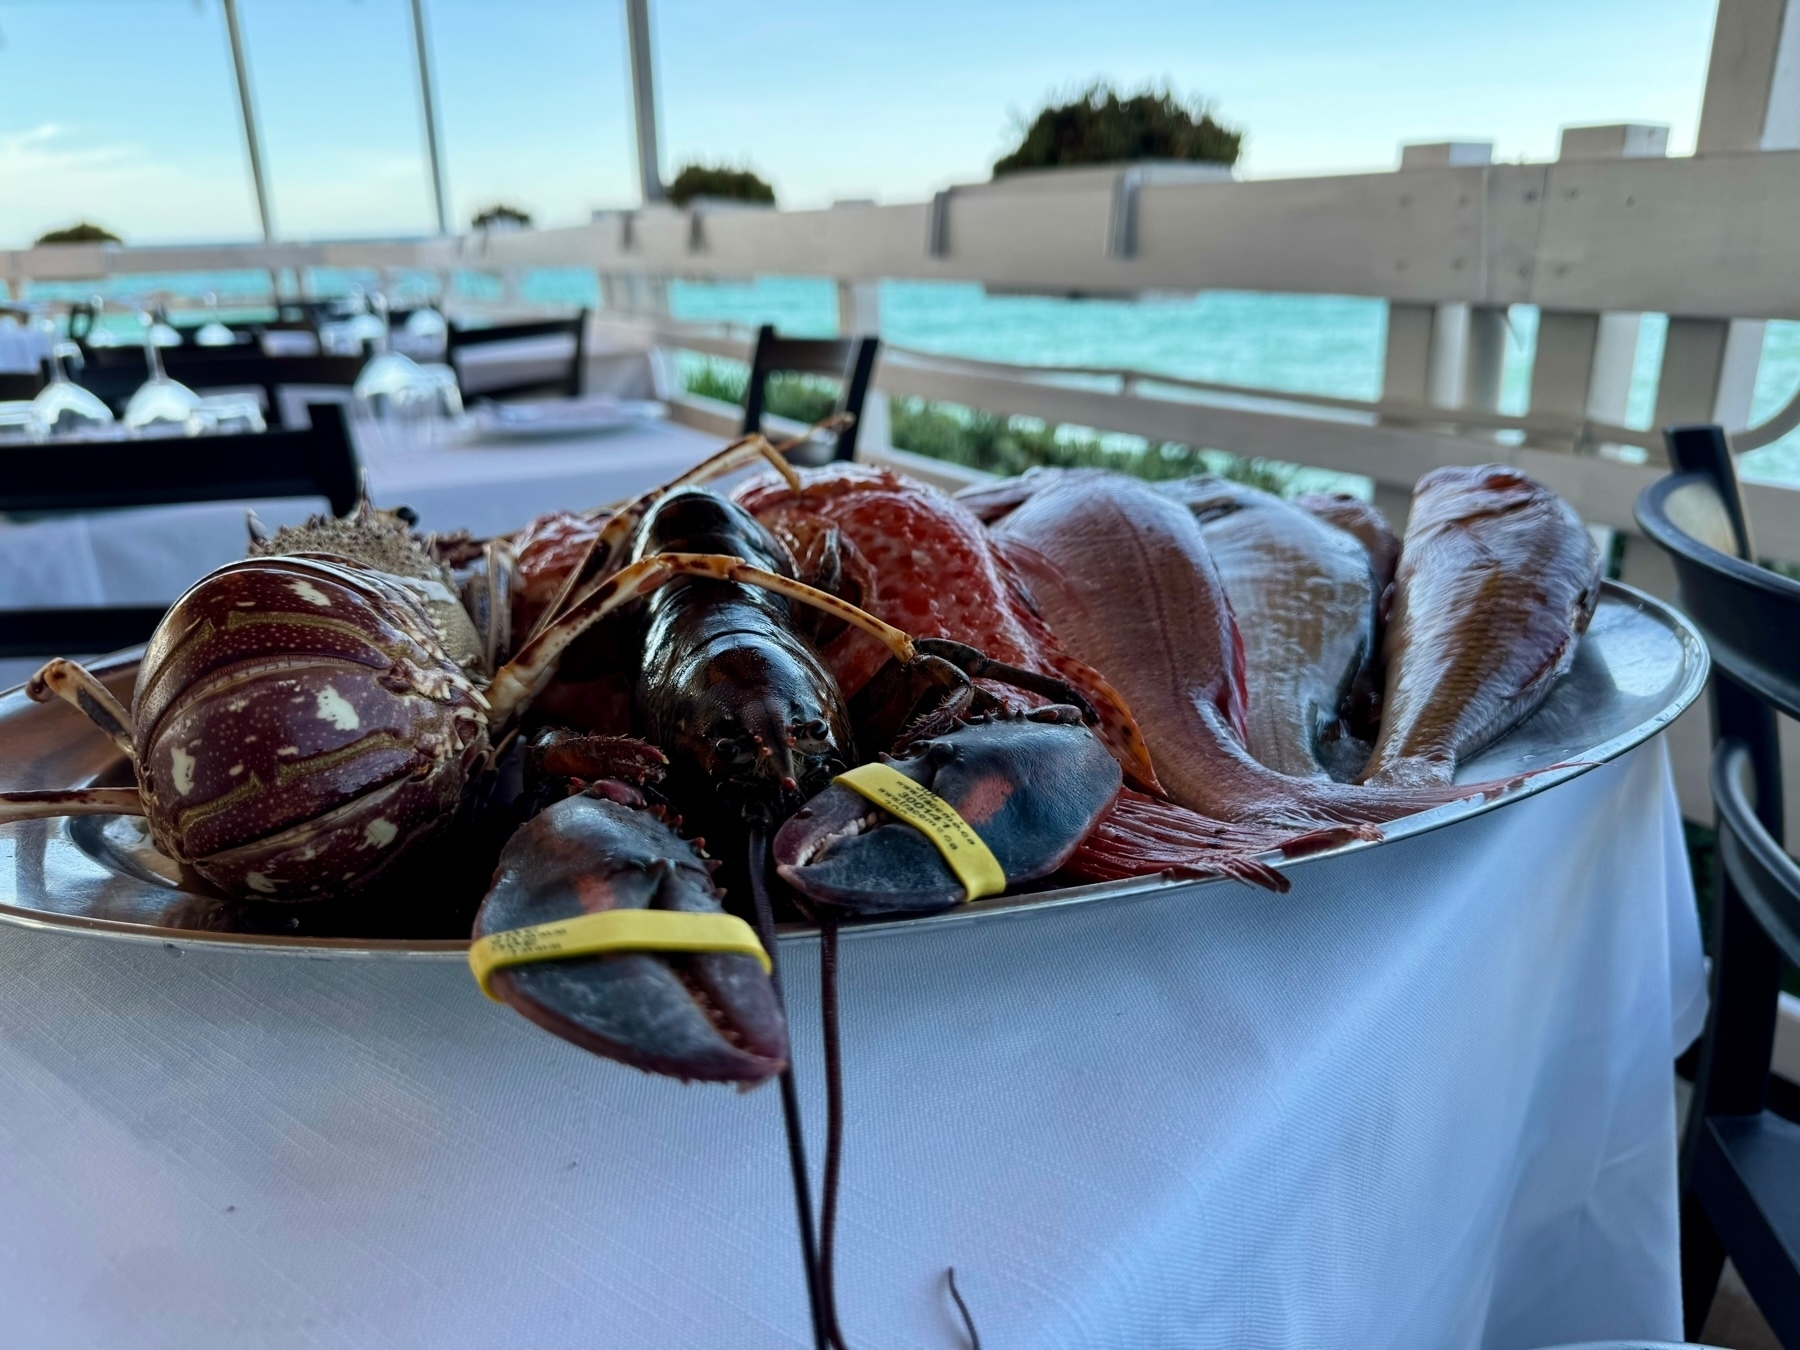 A platter of fresh seafood, including various types of fish and a lobster with rubber bands around its claws, is displayed on a white tablecloth in an outdoor dining setting with a sea view in the background.